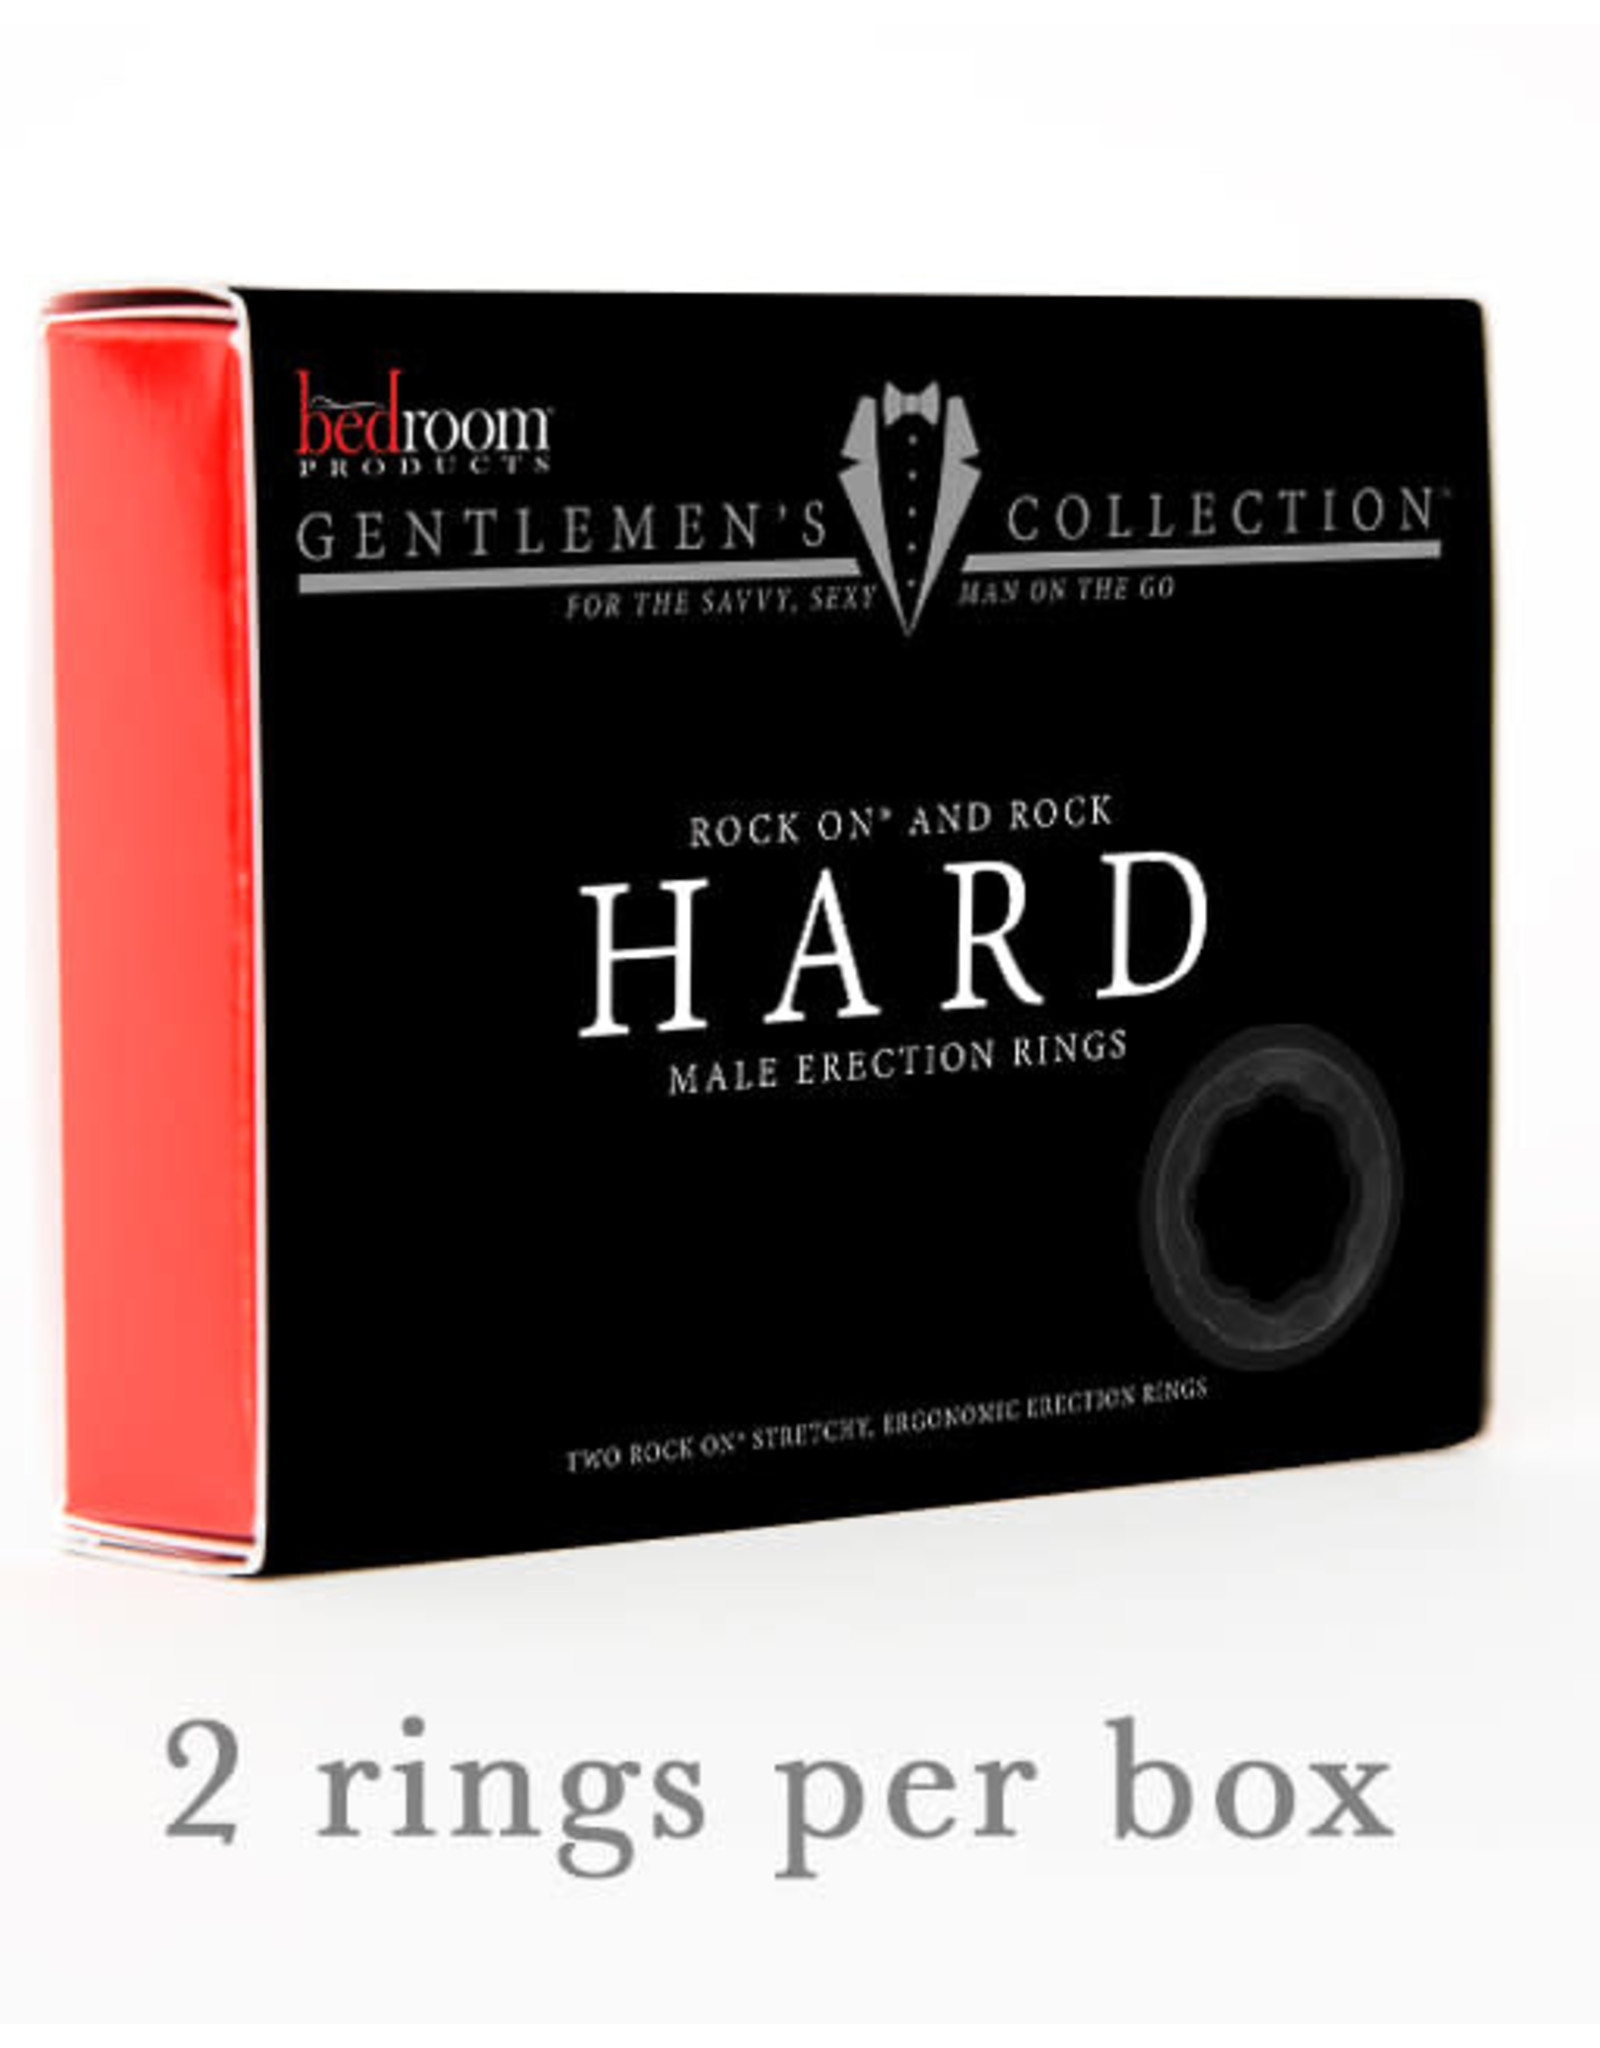 Bedroom Products Bedroom Products - Hard